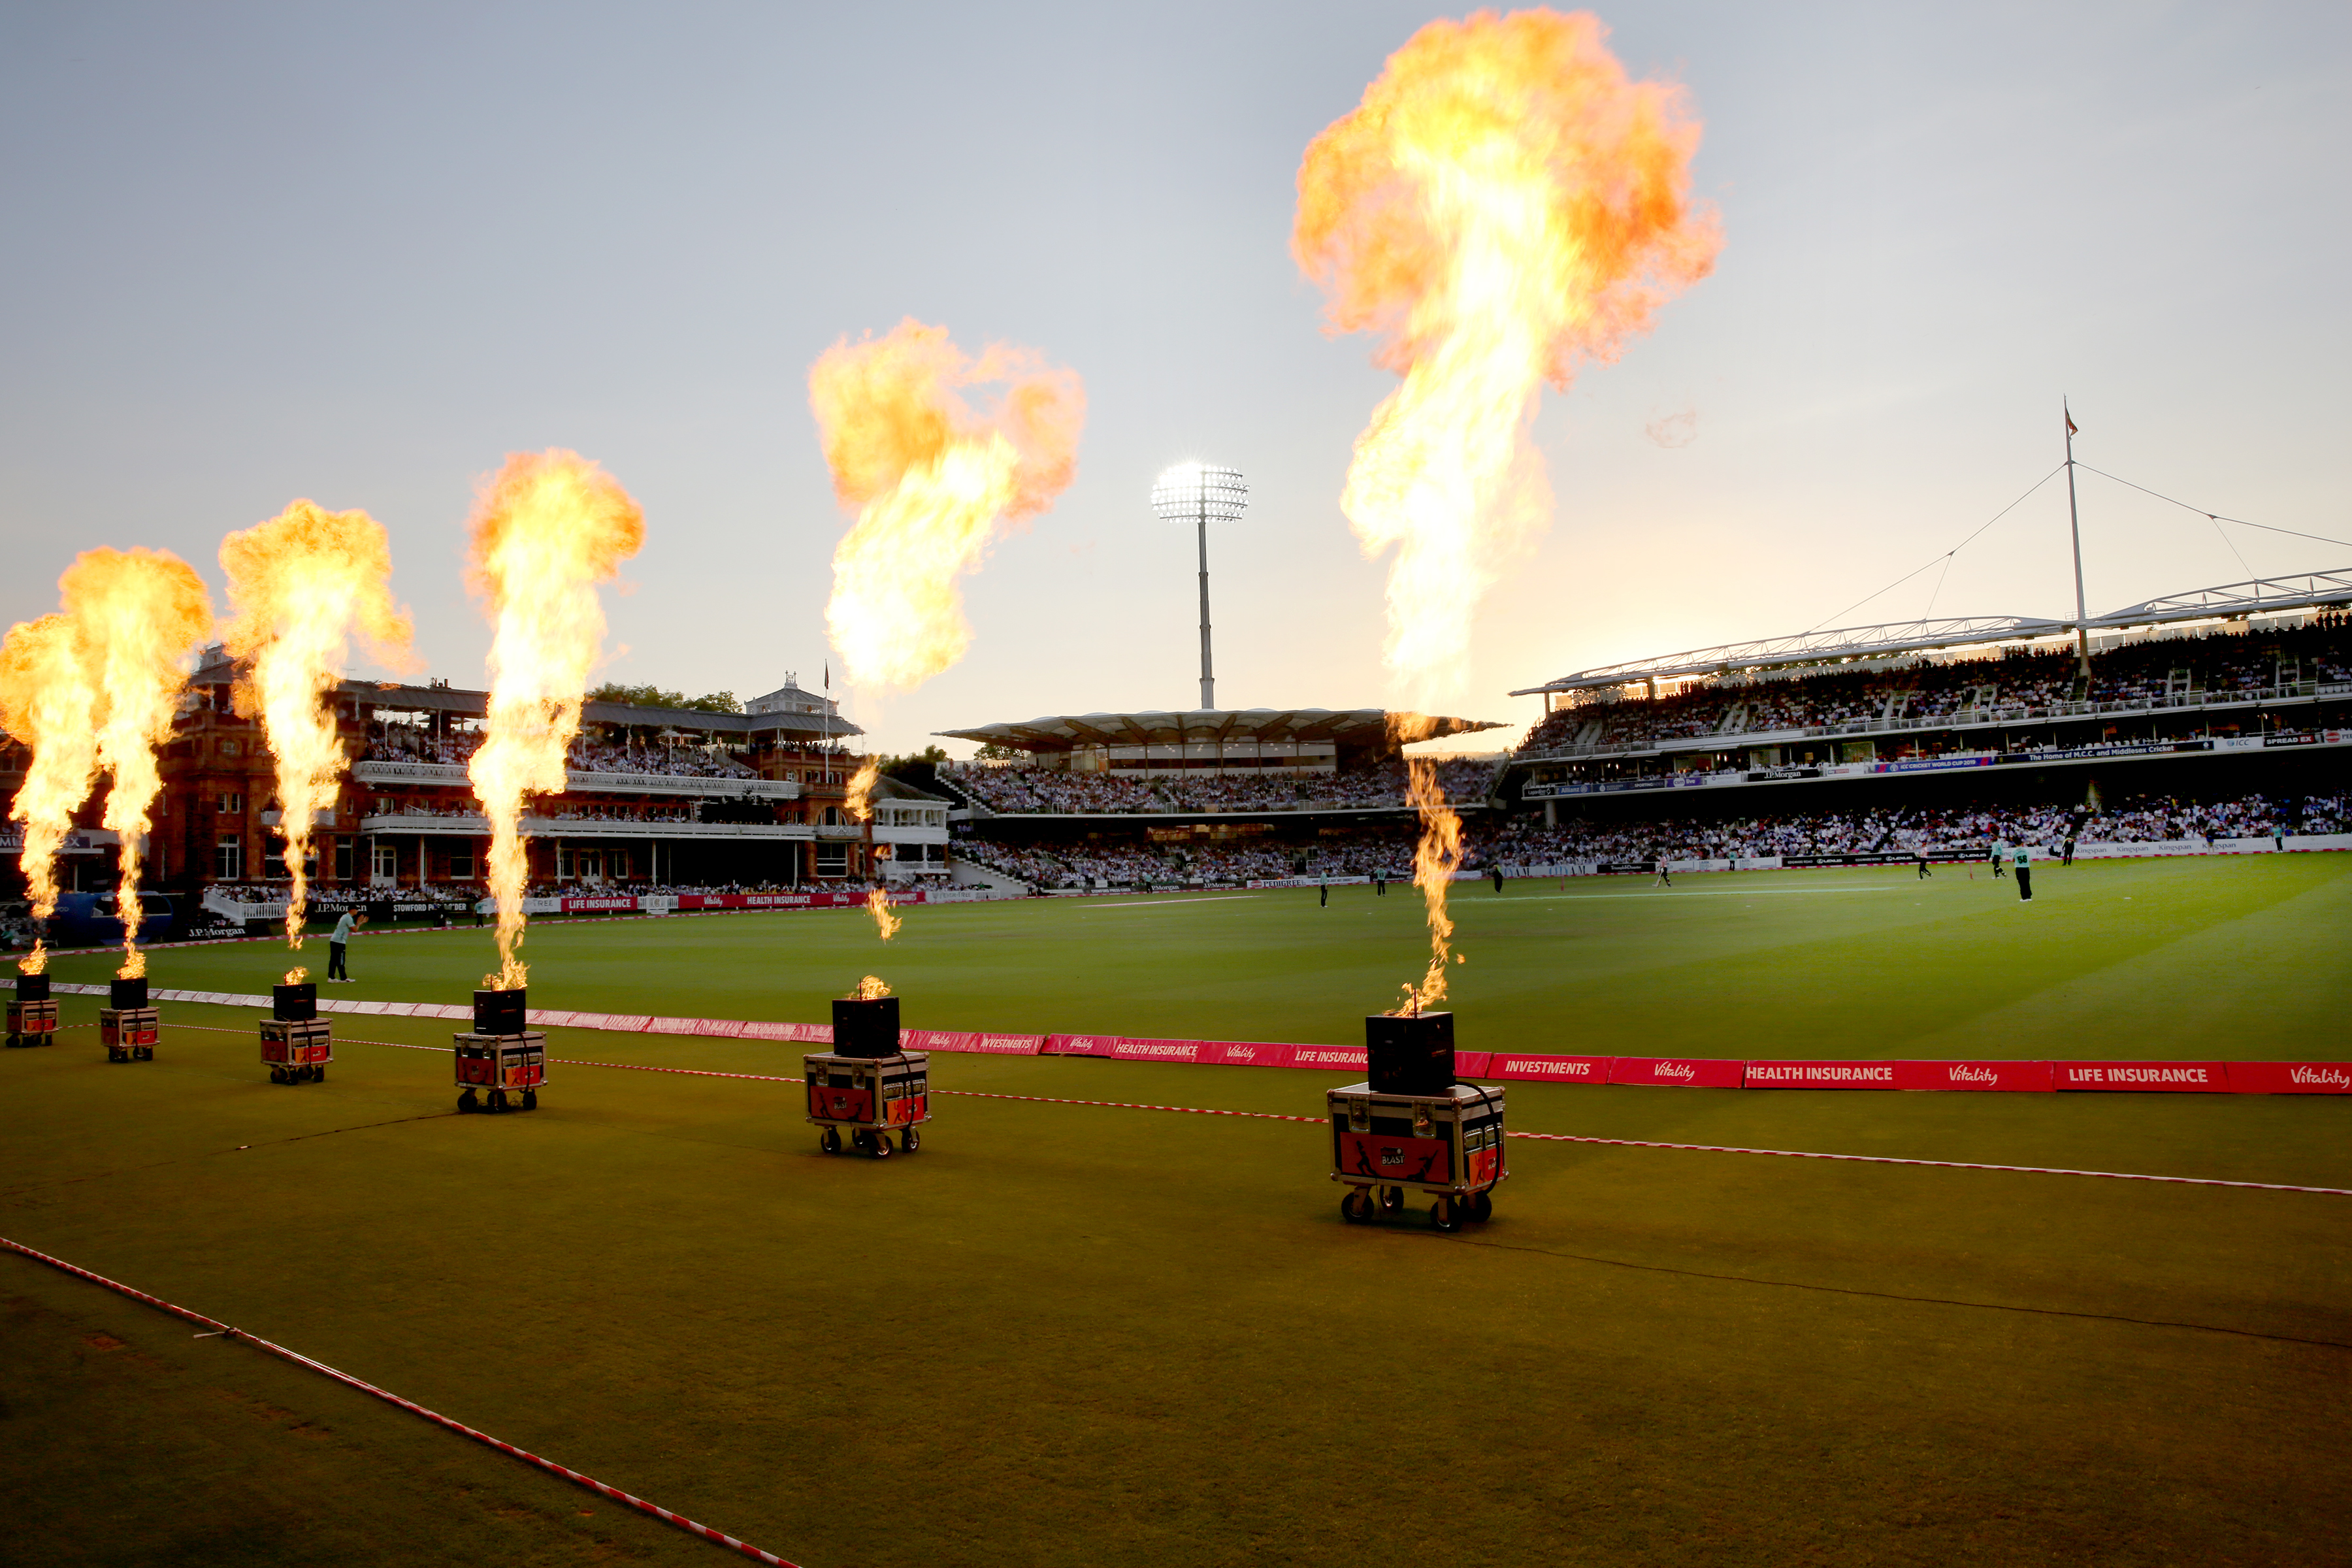 Lord's cricket ground | Getty